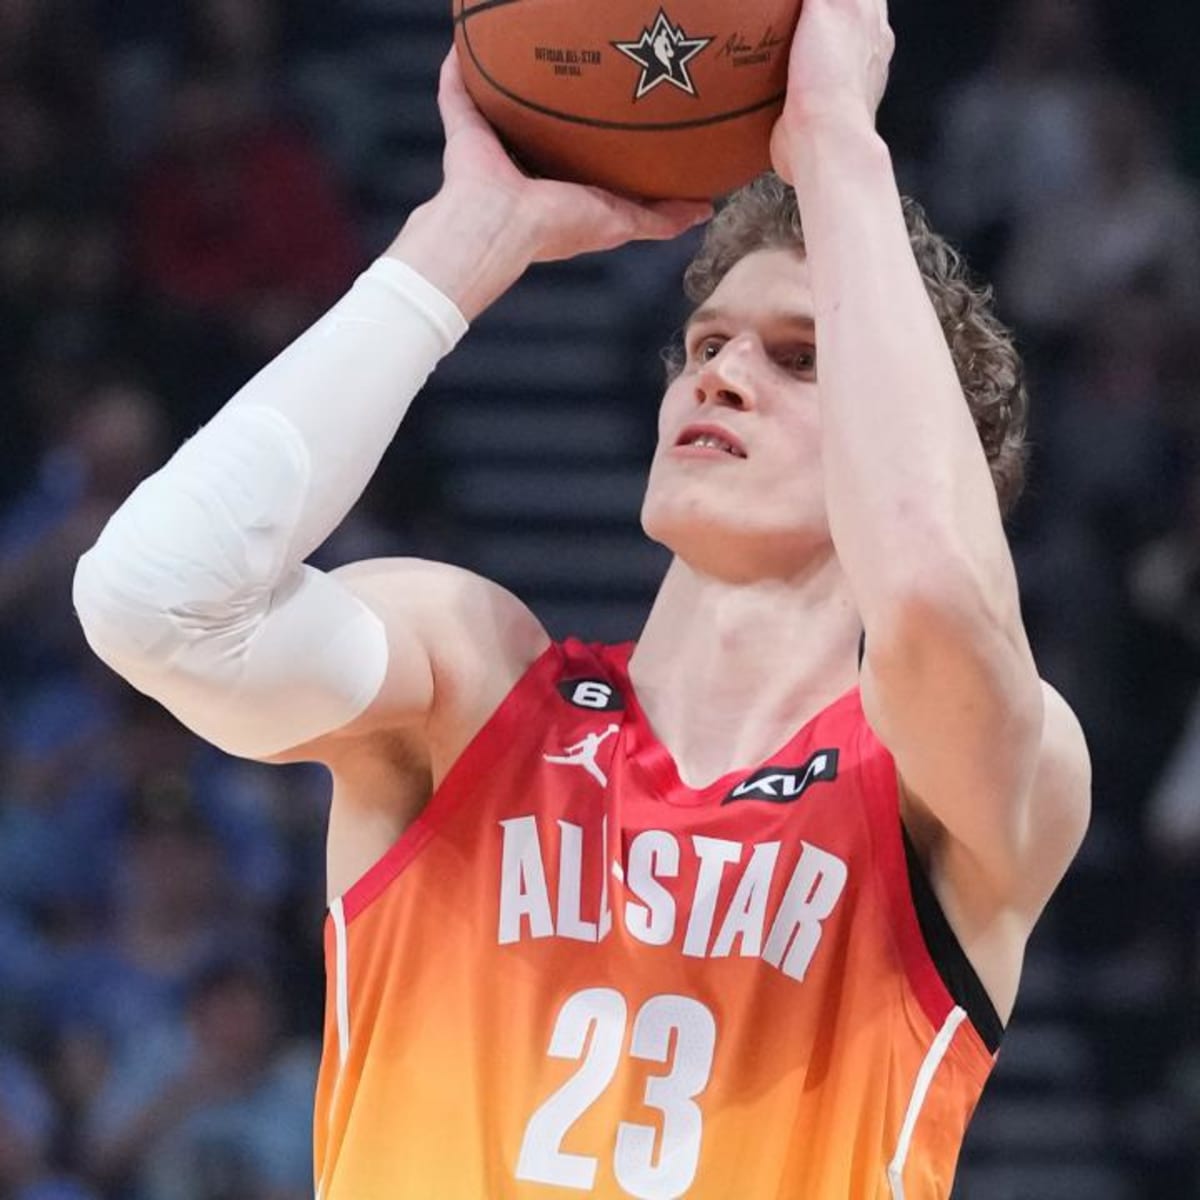 Lauri Markkanen leads the Utah Jazz to a comfortable win in his